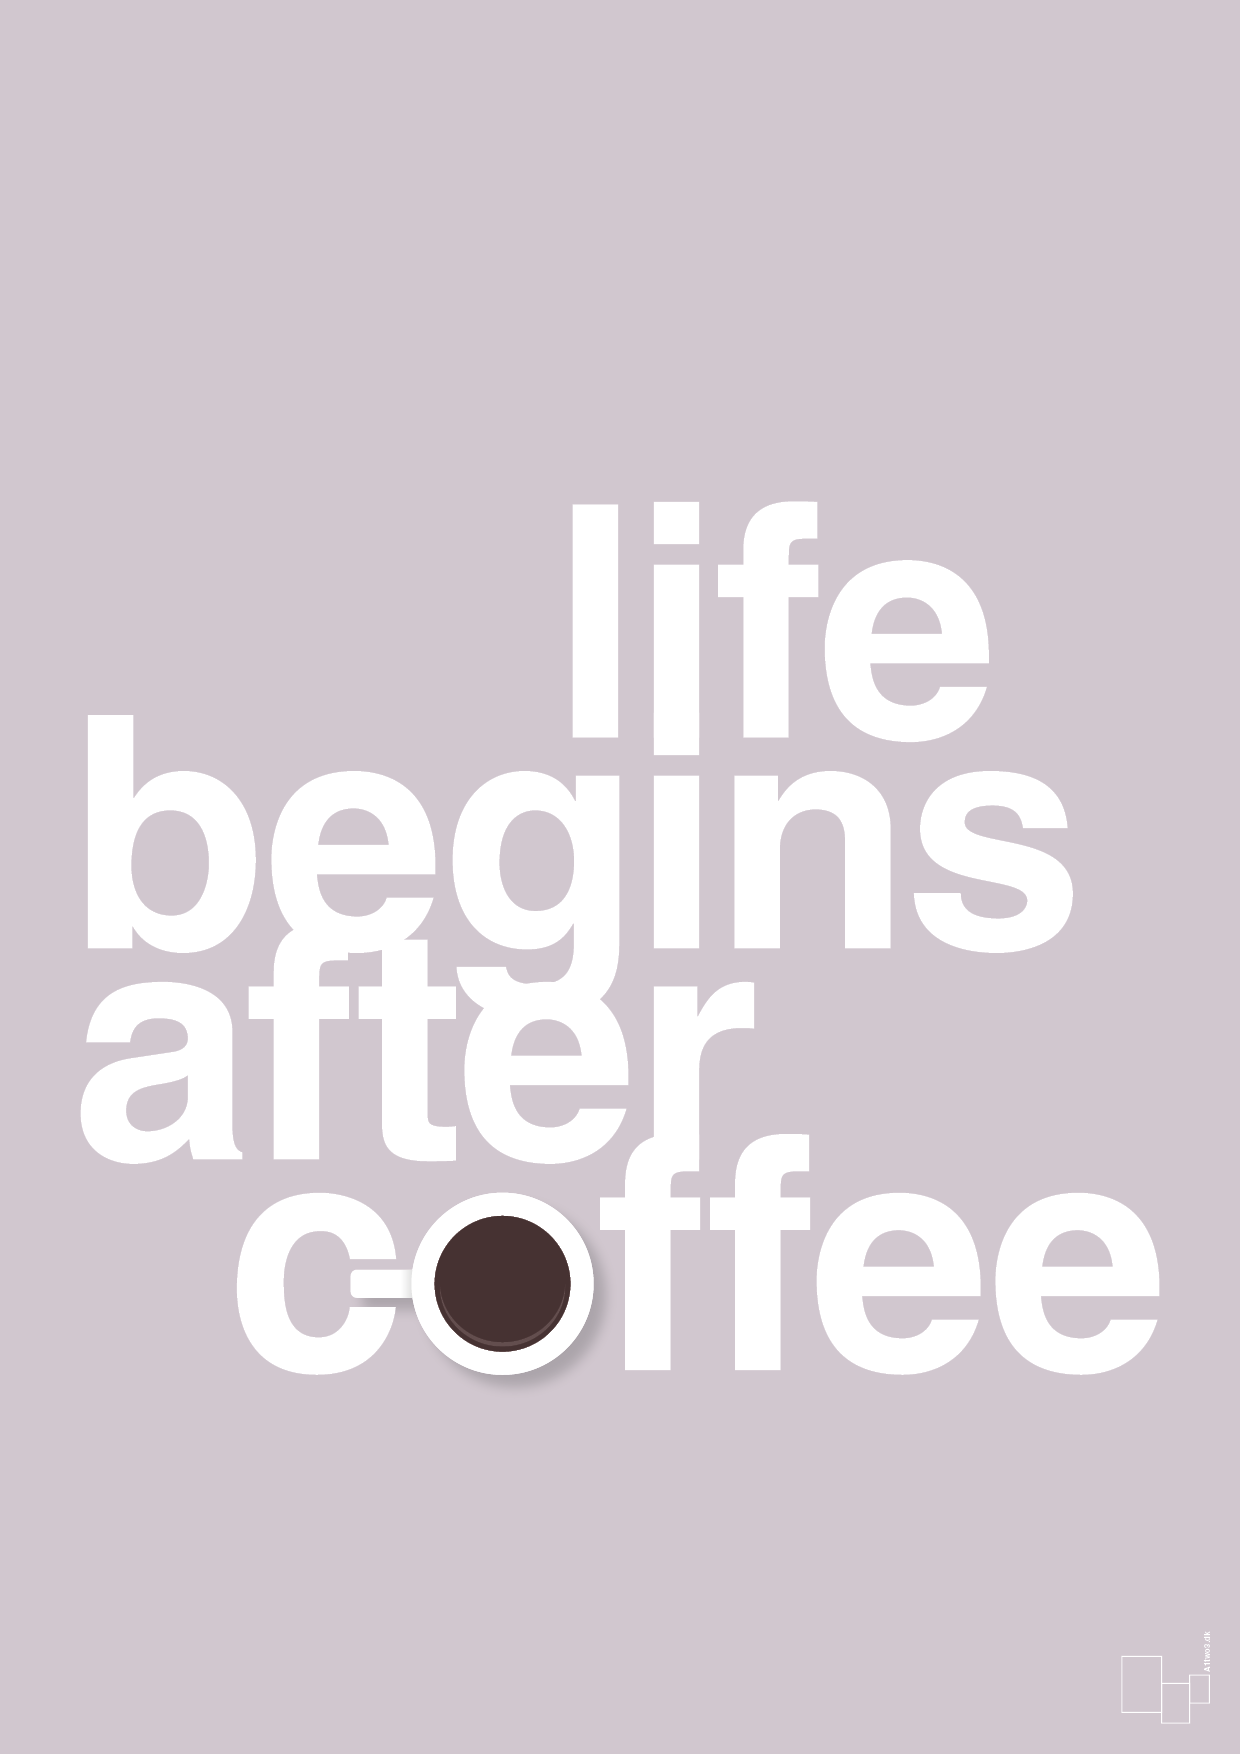 life begins after coffee - Plakat med Mad & Drikke i Dusty Lilac